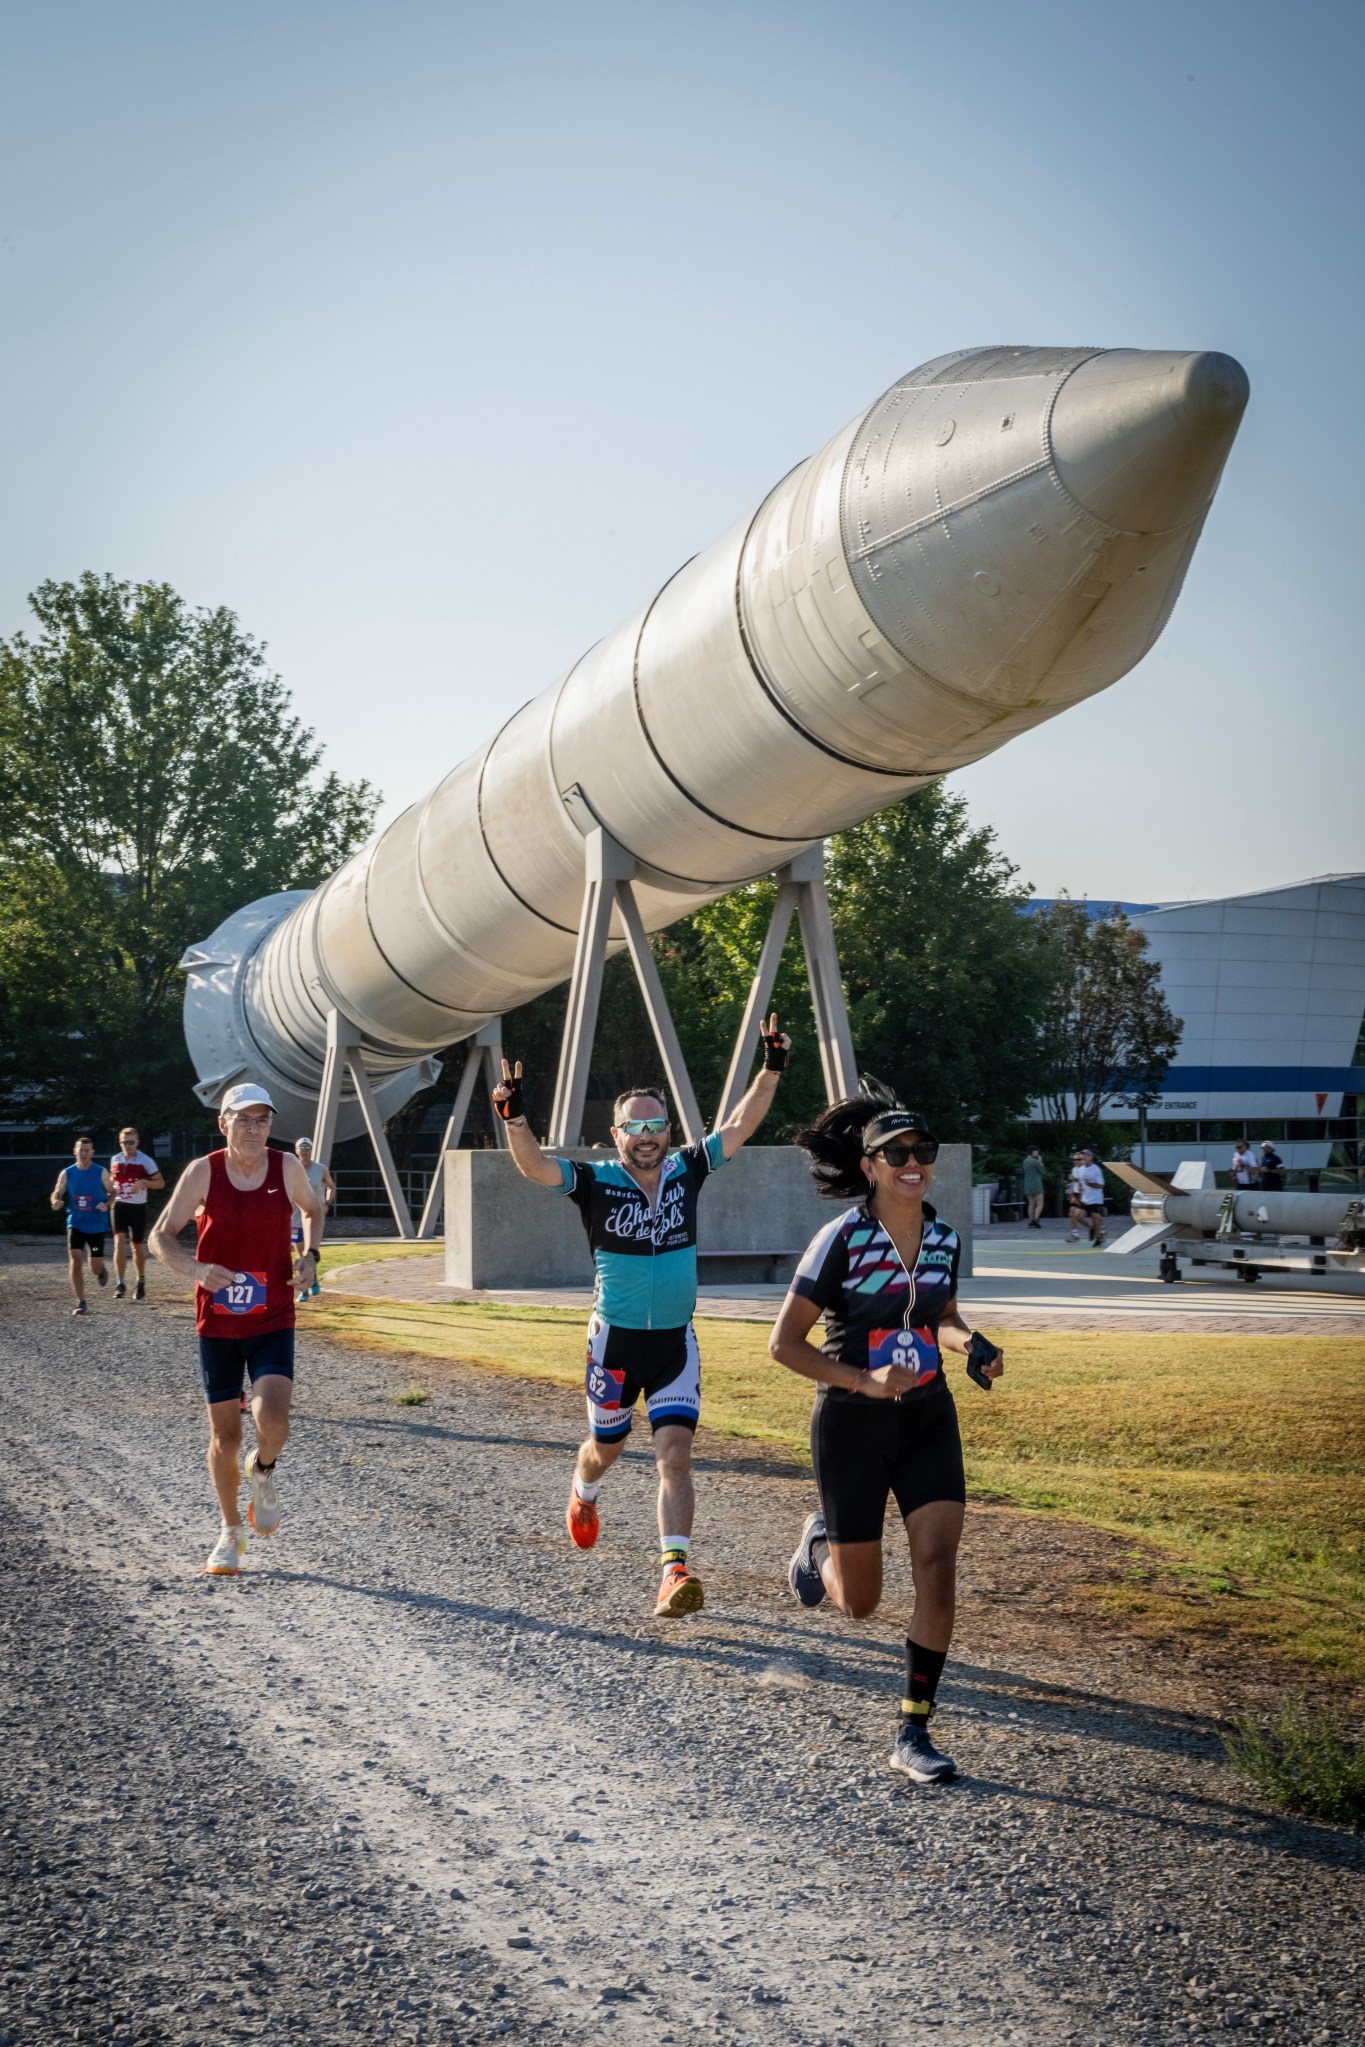 Racers competed to beat the International Space Station in the annual “Racin’ the Station” duathlon Sept. 30 at Marshall Space Flight Center. The goal of the race is to complete the course faster than the station takes to complete one Earth orbit, or just over 90 minutes.